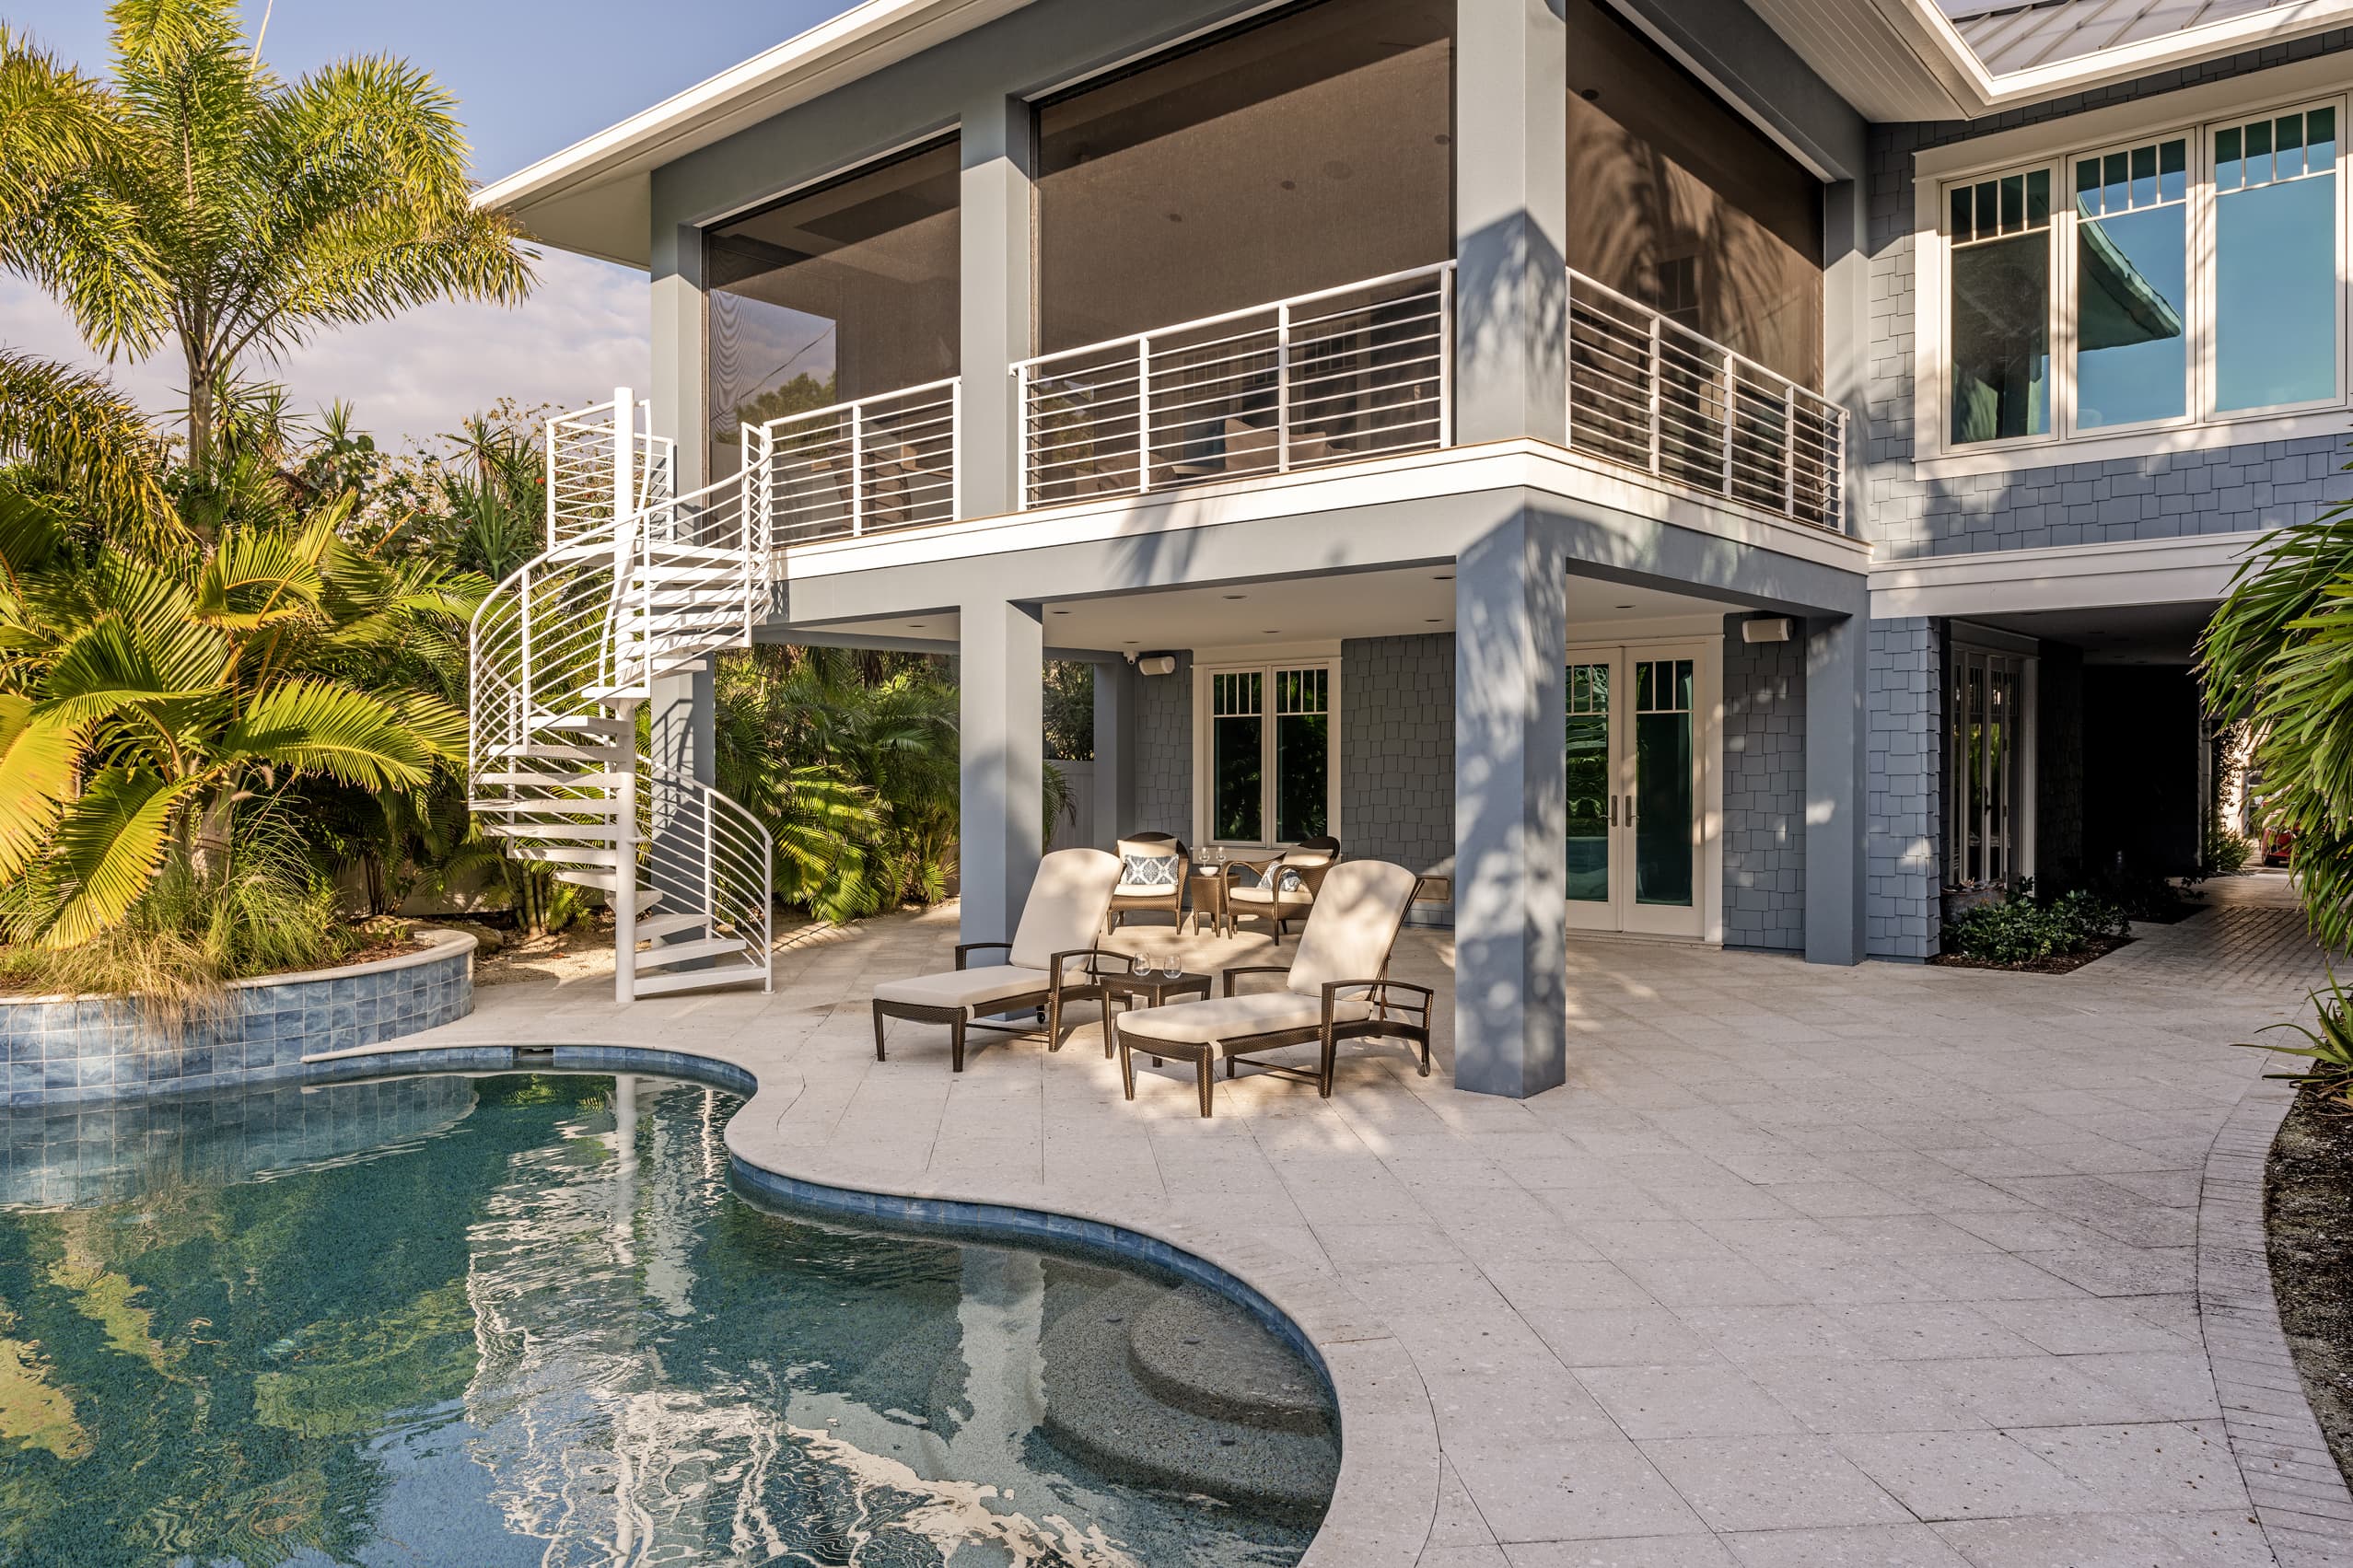 Rear Exterior Three Quater View Palm Trees Pool Sunlouges Spiral Staircase